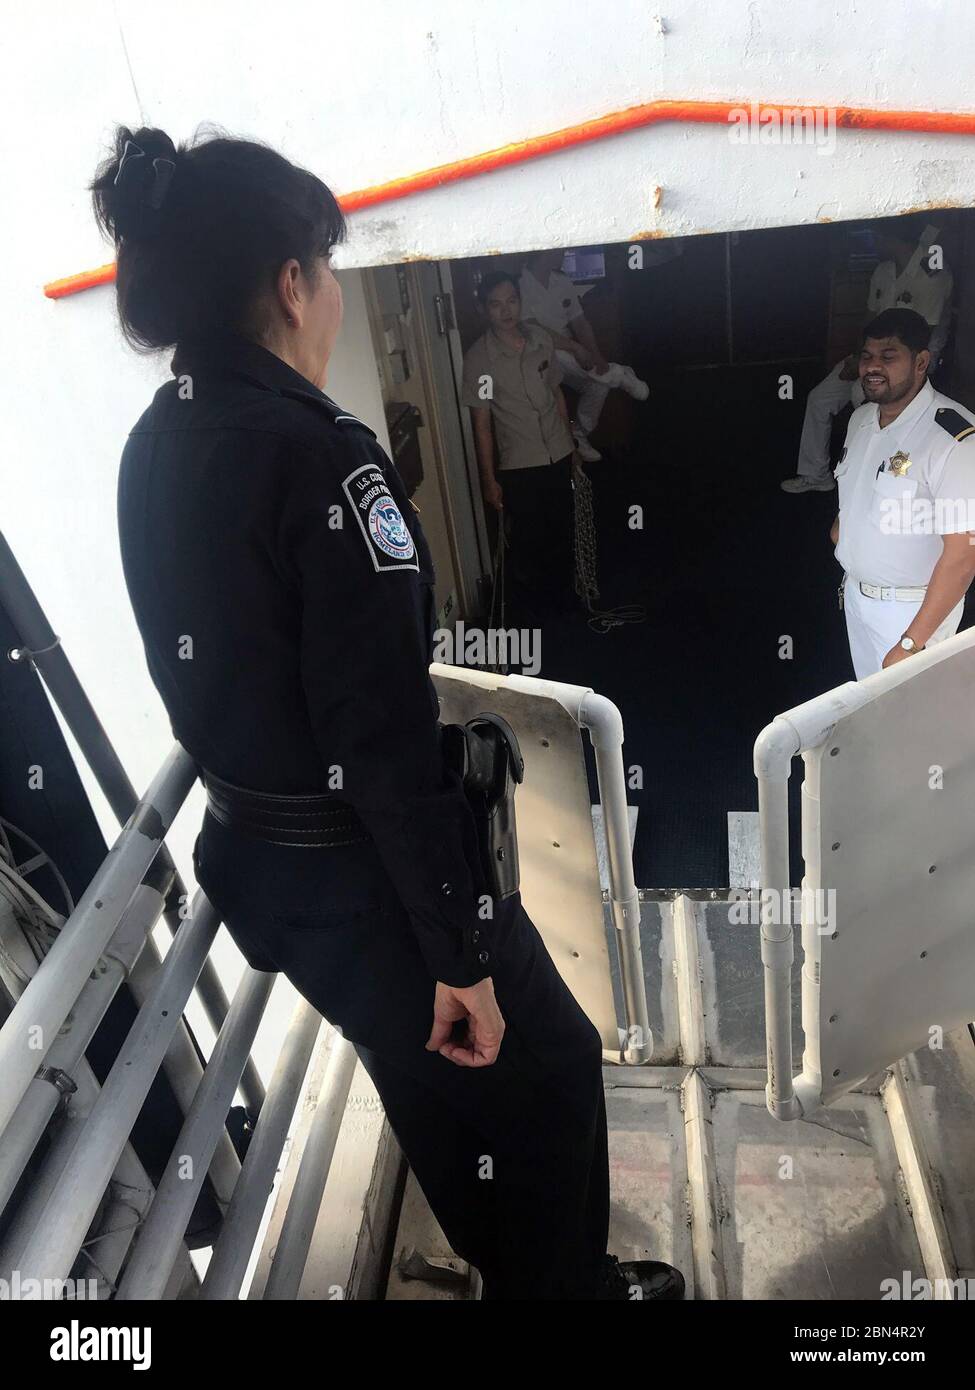 CBP West Palm Beach Port Director Jennifer Connors greets the crew from the Bahamas Paradise Cruise line as their ship Grand Celebration arrives in the Port of Palm Beach, Fla., Sept. 7, 2019. U.S. Customs and Border Protection continues to support rescue and recovery efforts in the Bahamas following the devastating impact of Hurricane Dorian. CBP is working with the Bahamas Paradise Cruise Line and is prepared to process the arrivals of passengers evacuating from the Bahamas according to established policy and procedures. Stock Photo